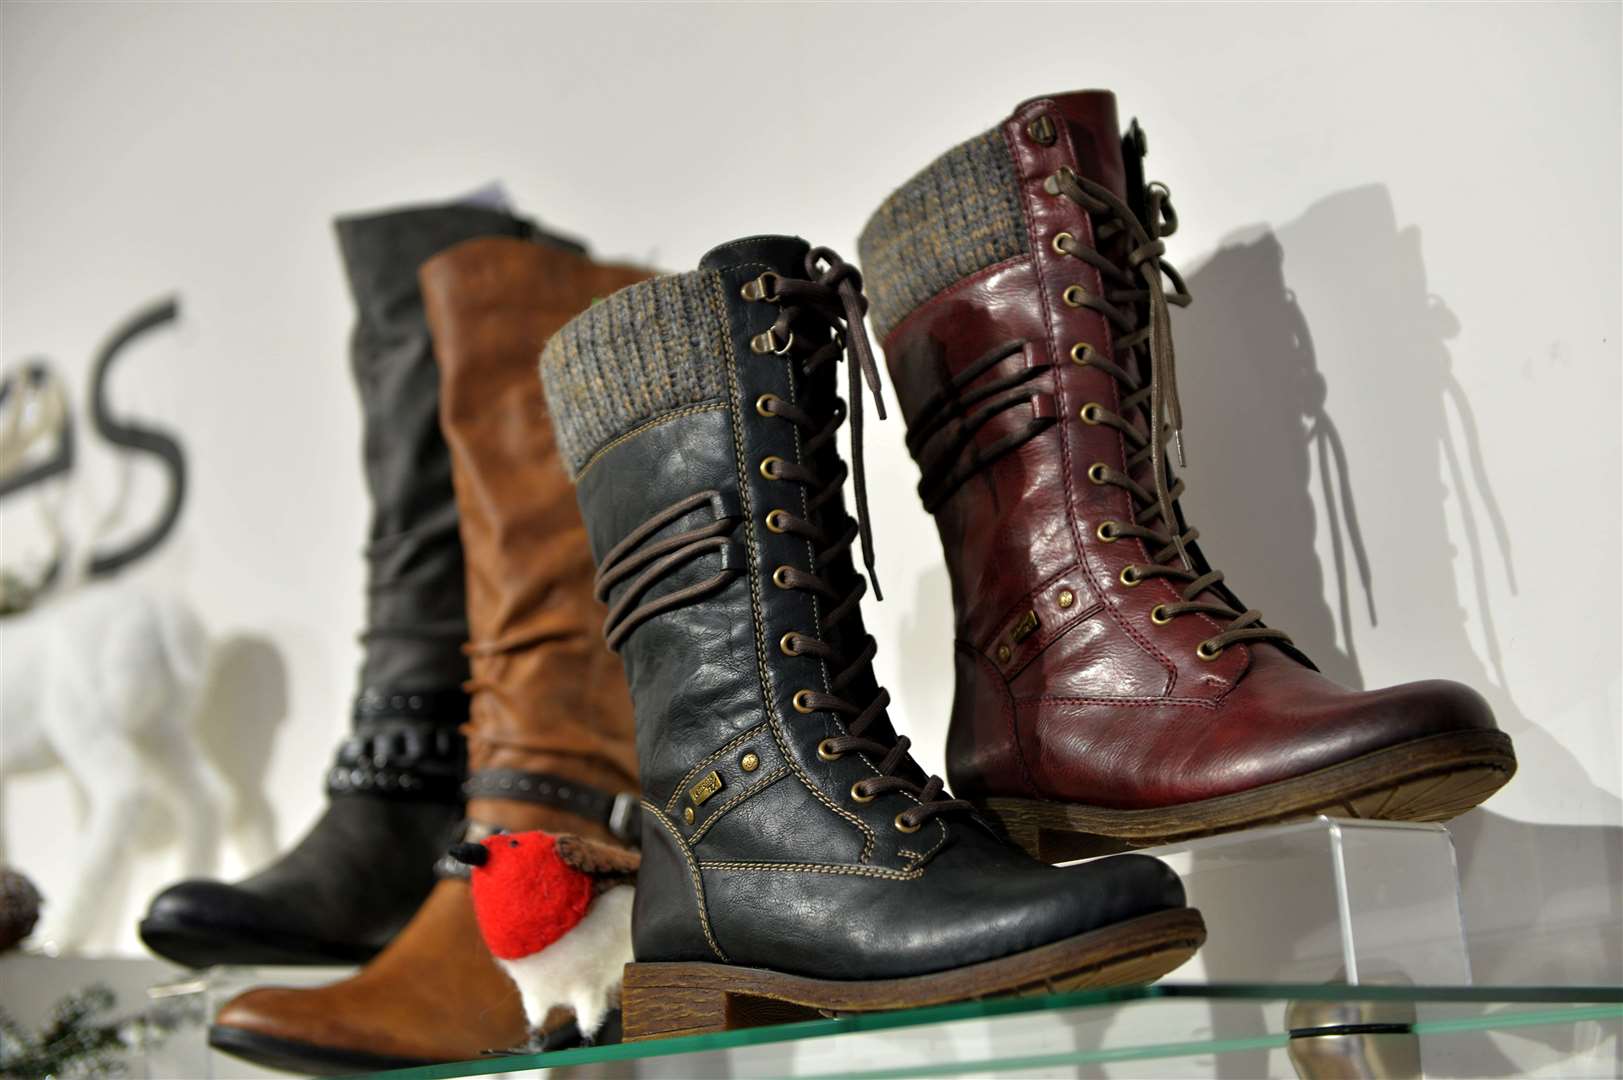 Find your investment winter boots at Begg Shoes.